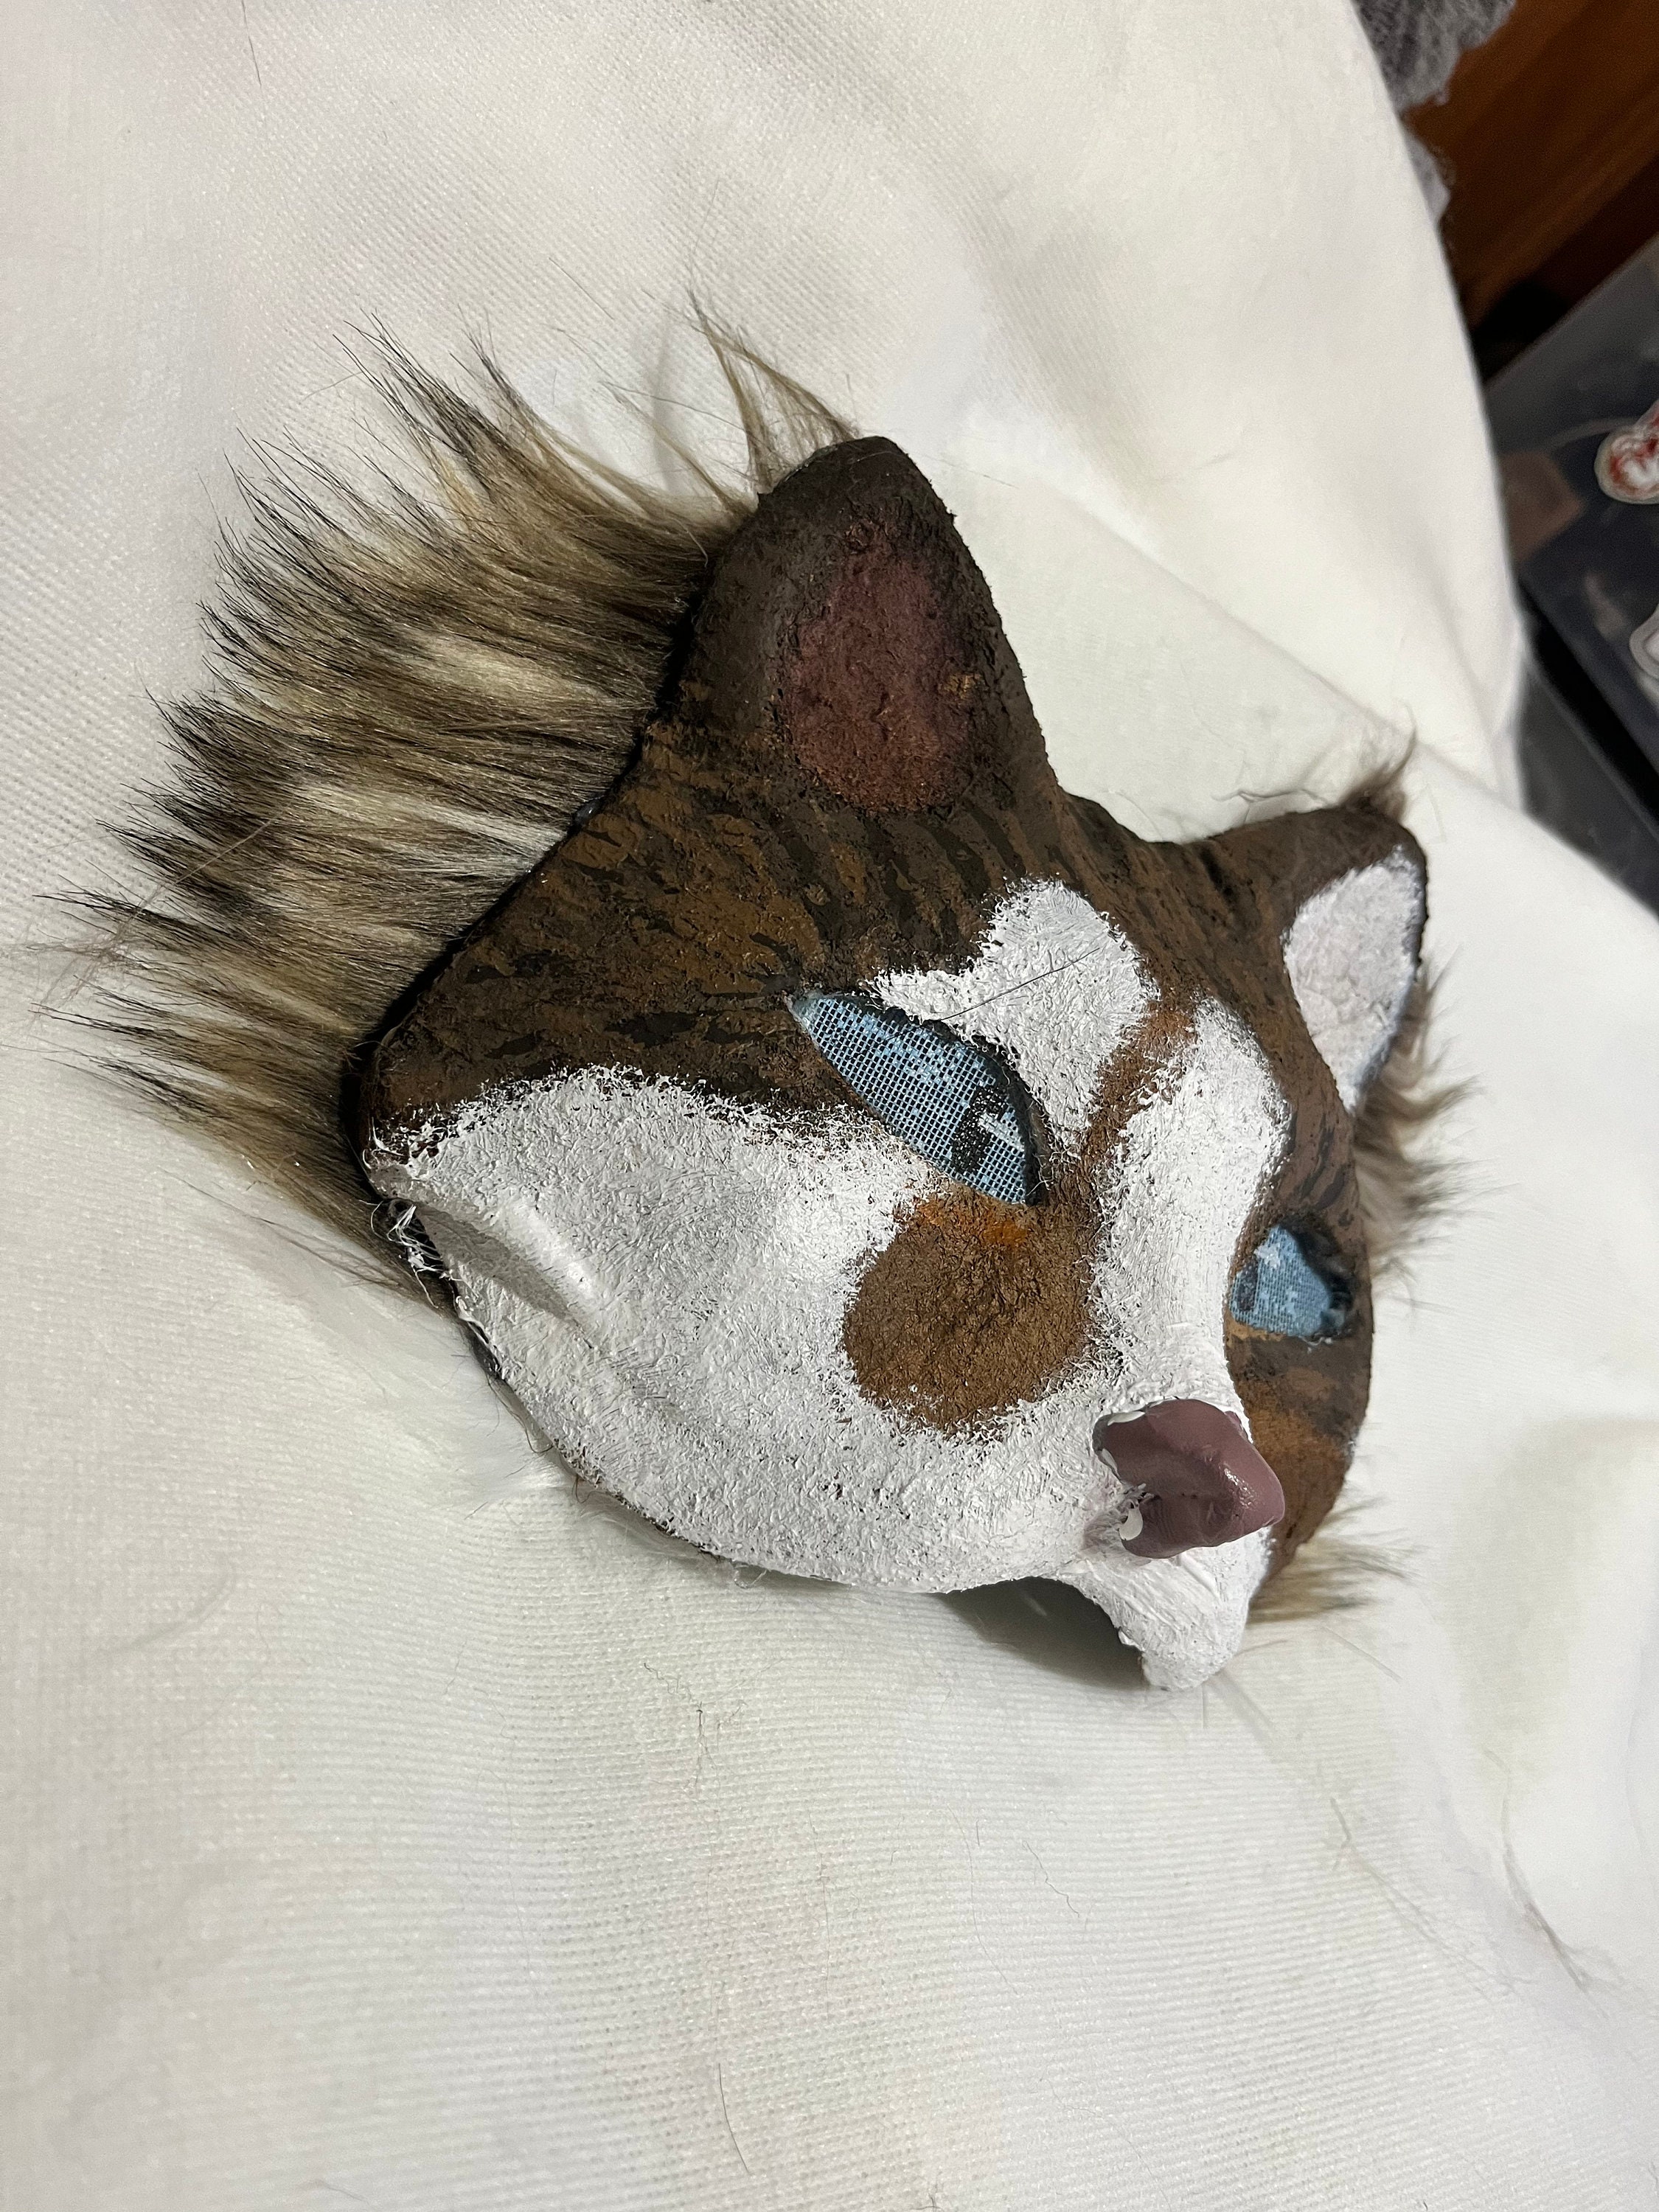 Brown Therian Cat Mask 